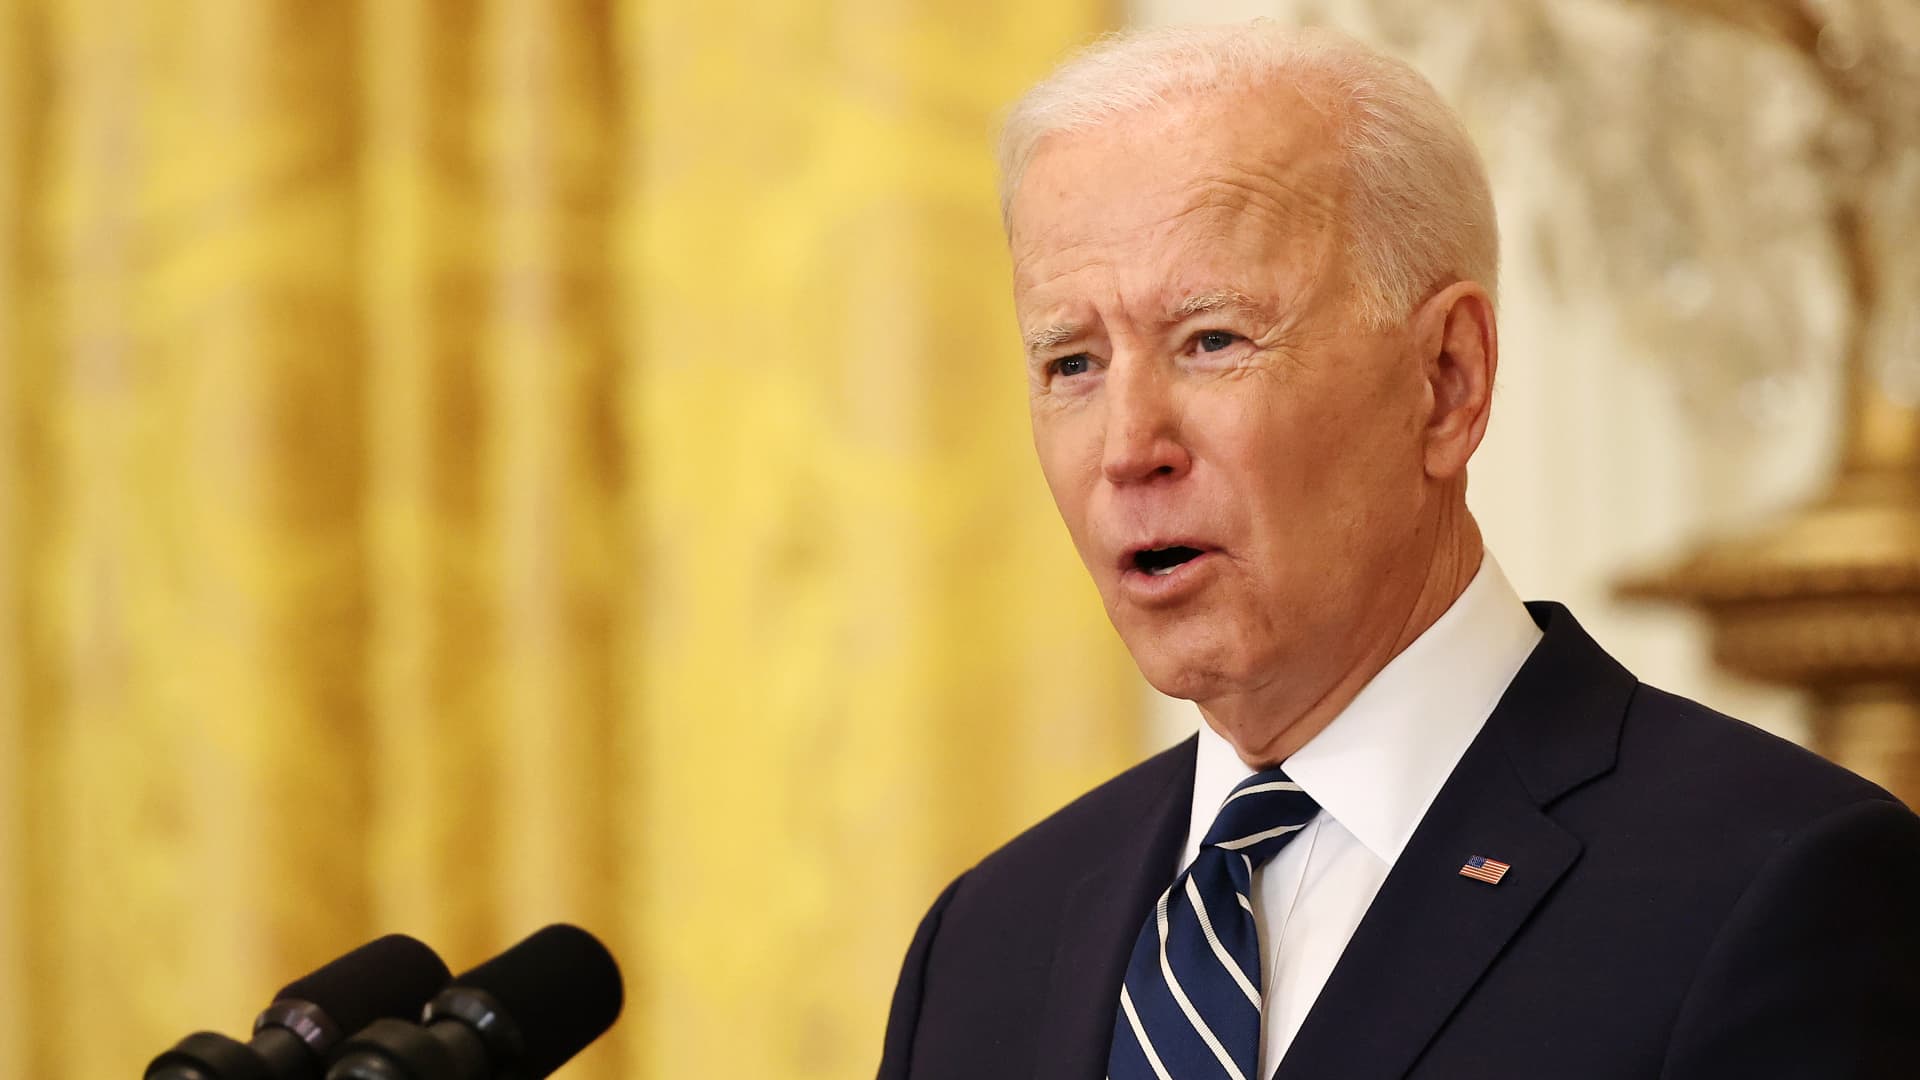 President Joe Biden talks to reporters during the first news conference of his presidency in the East Room of the White House on March 25, 2021 in Washington, DC.